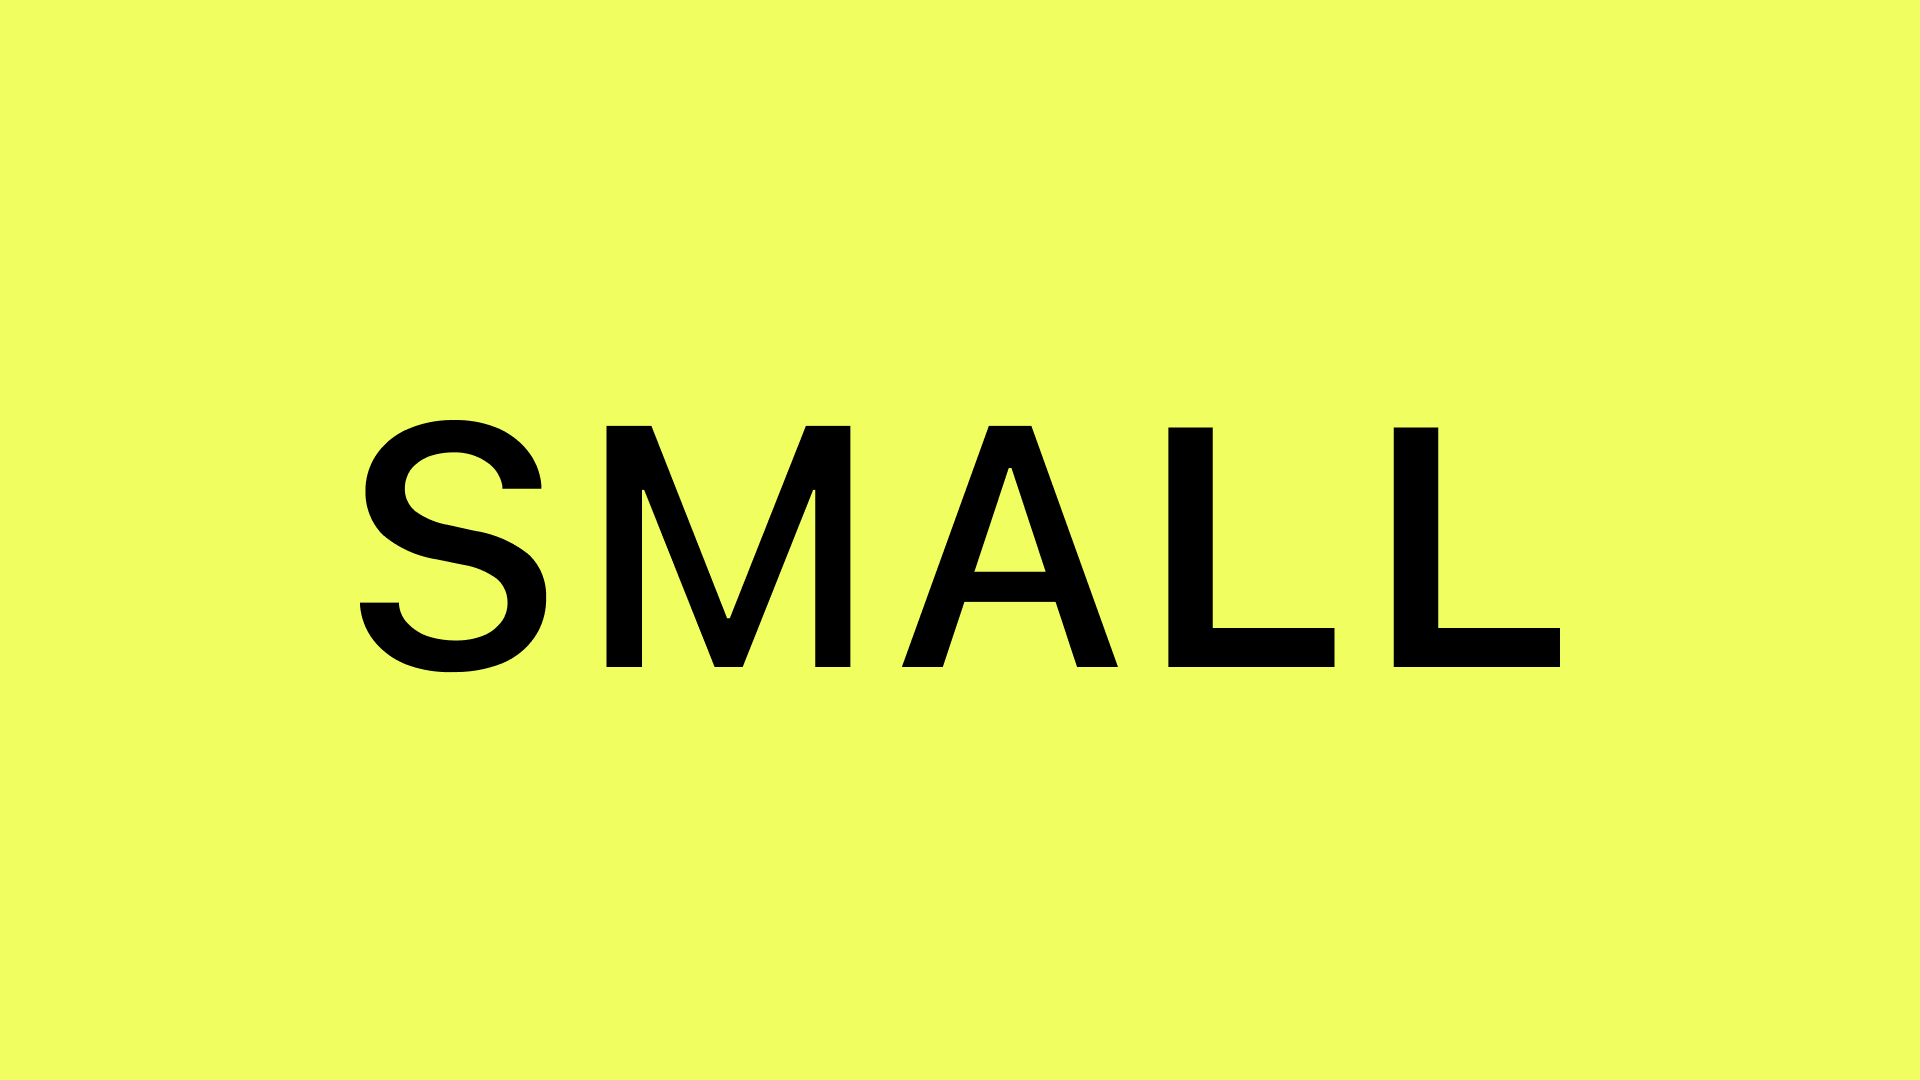 Steam small text фото 24